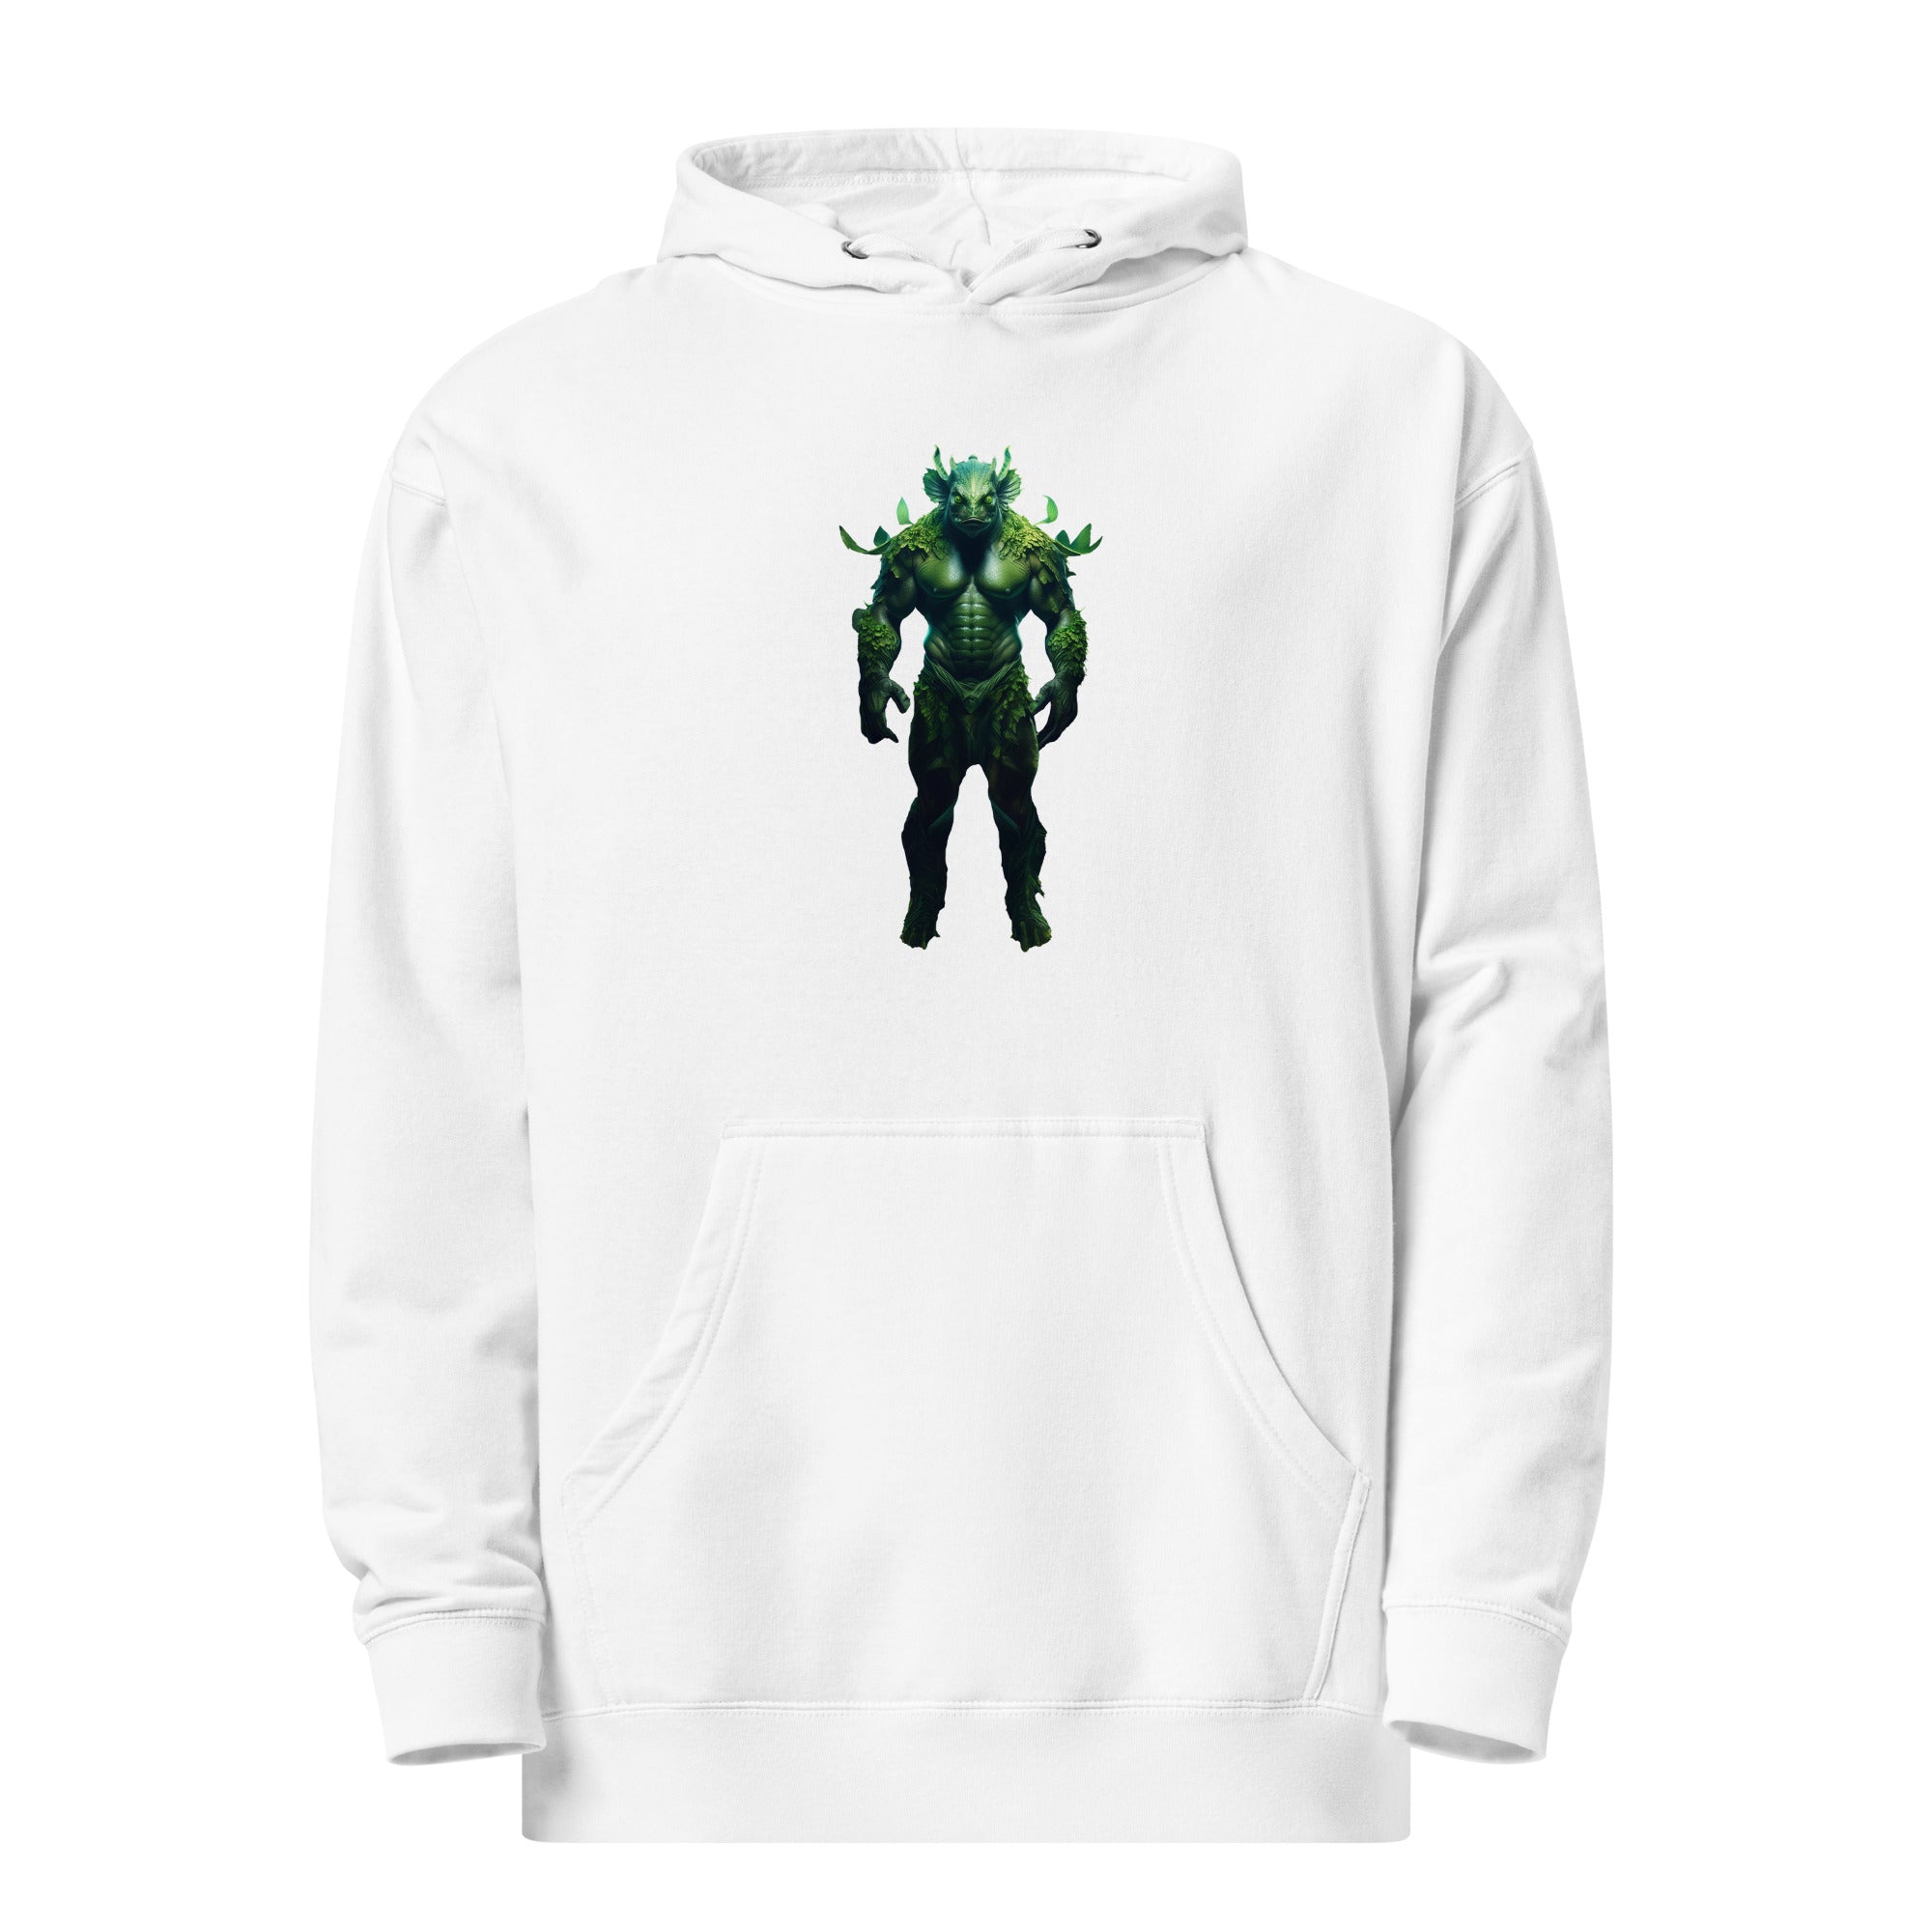 The Monster Squad "The Creature" Unisex hoodie